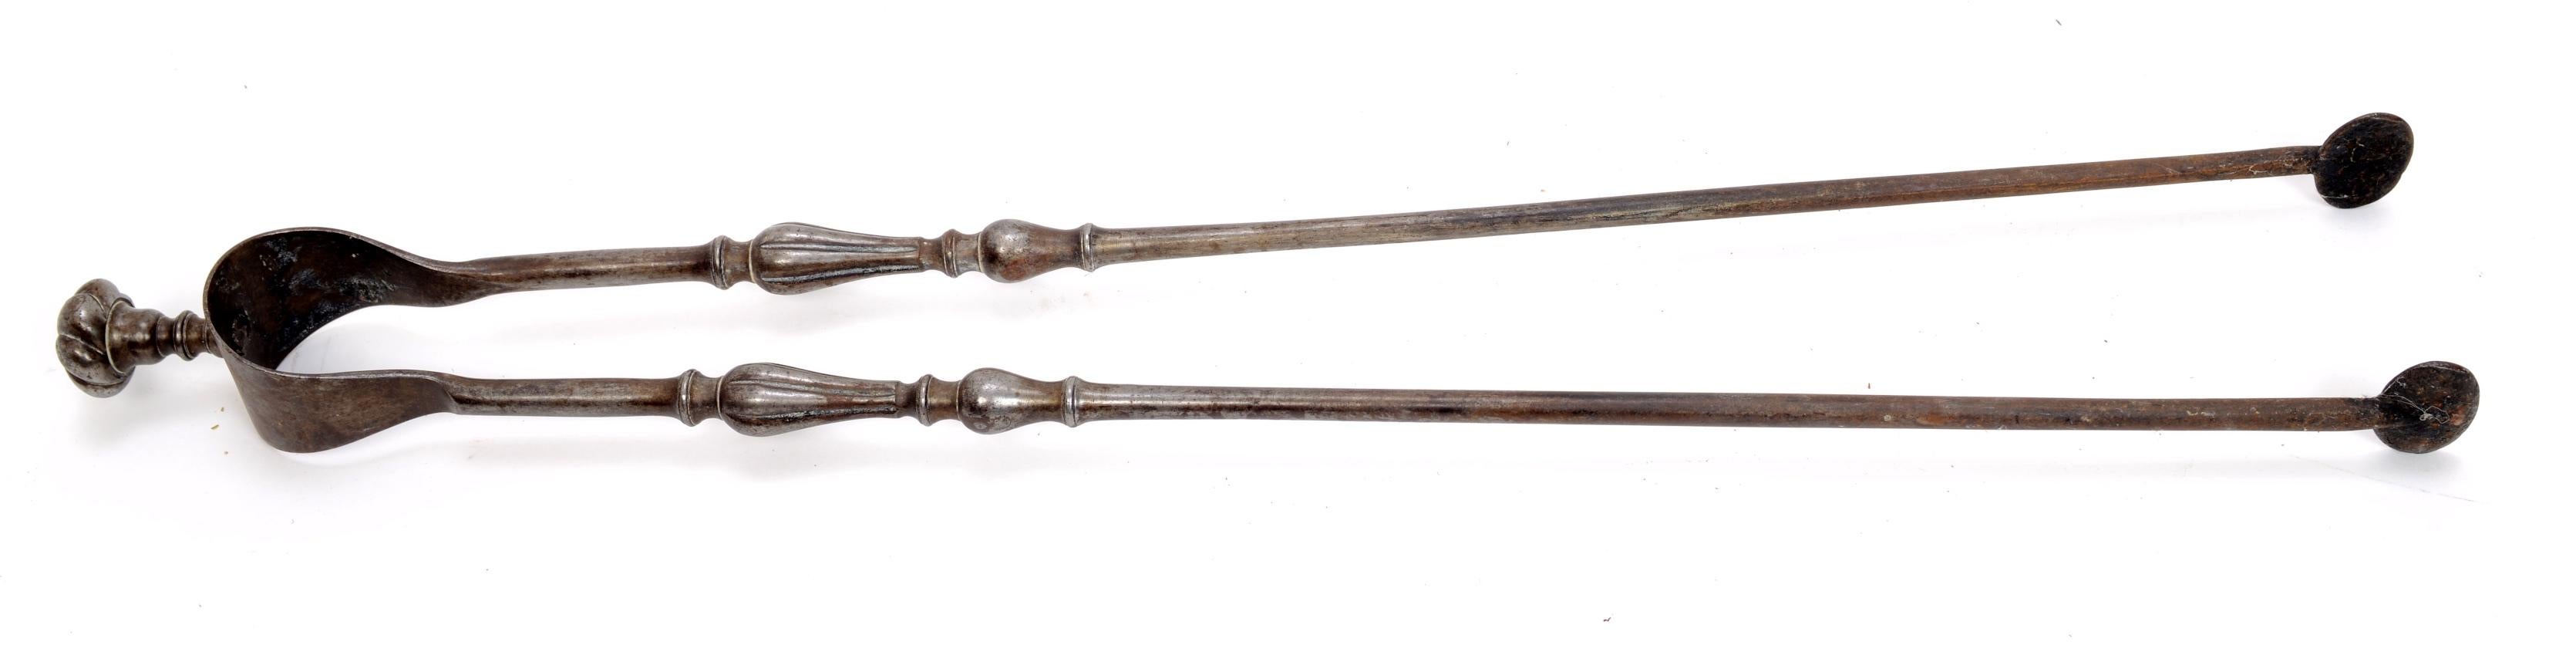 English Fireplace Tools, Polished Steel, Late 18th-Early 19th Century For Sale